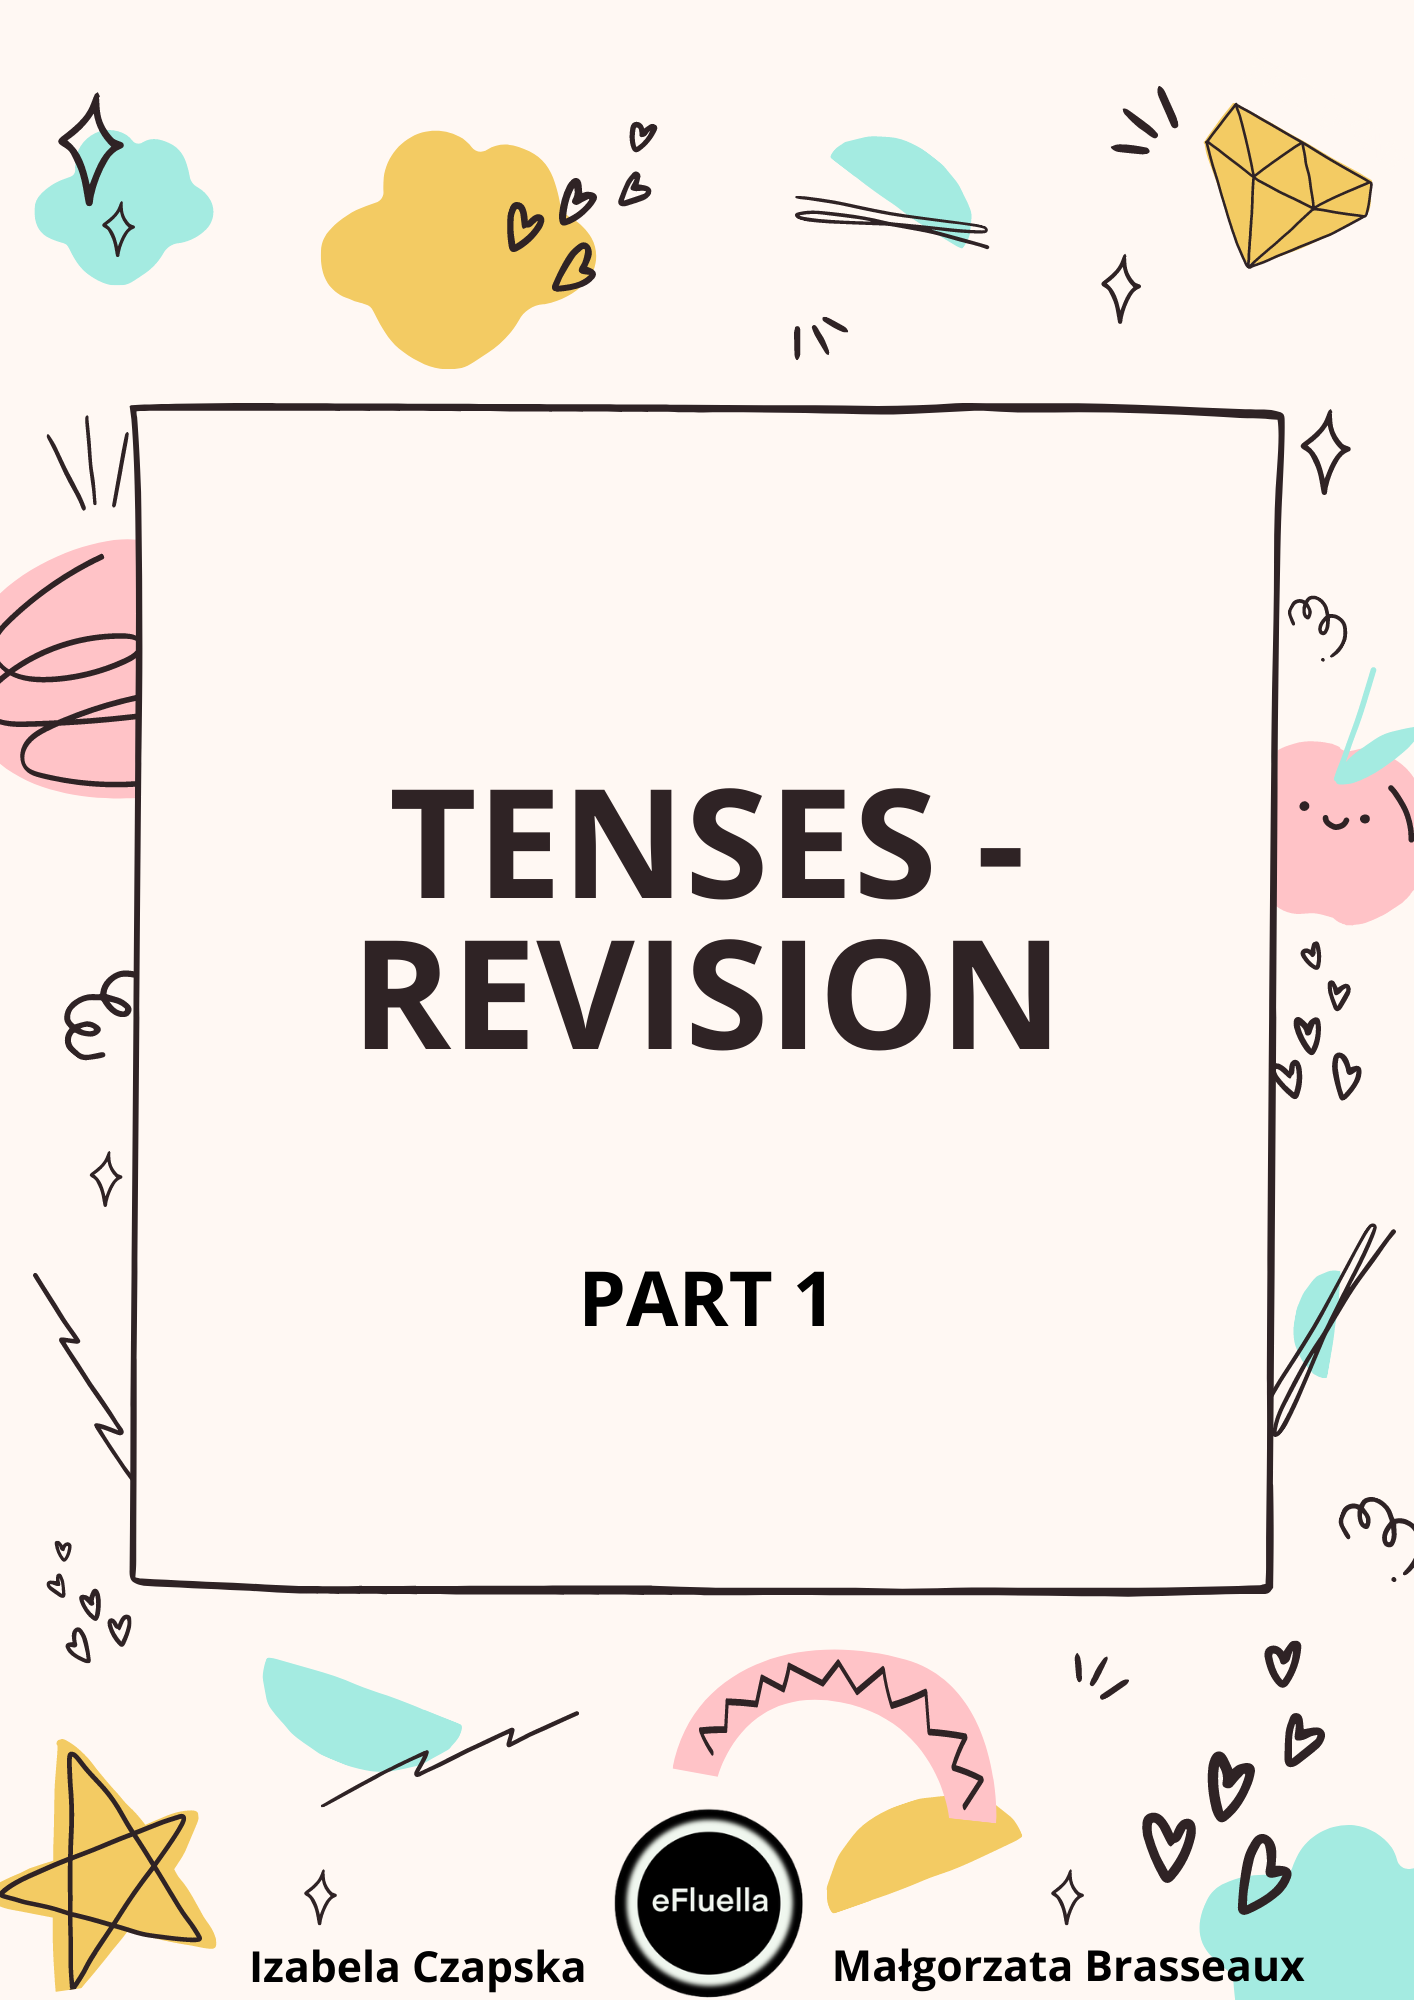 Tenses revision part 1 free sample